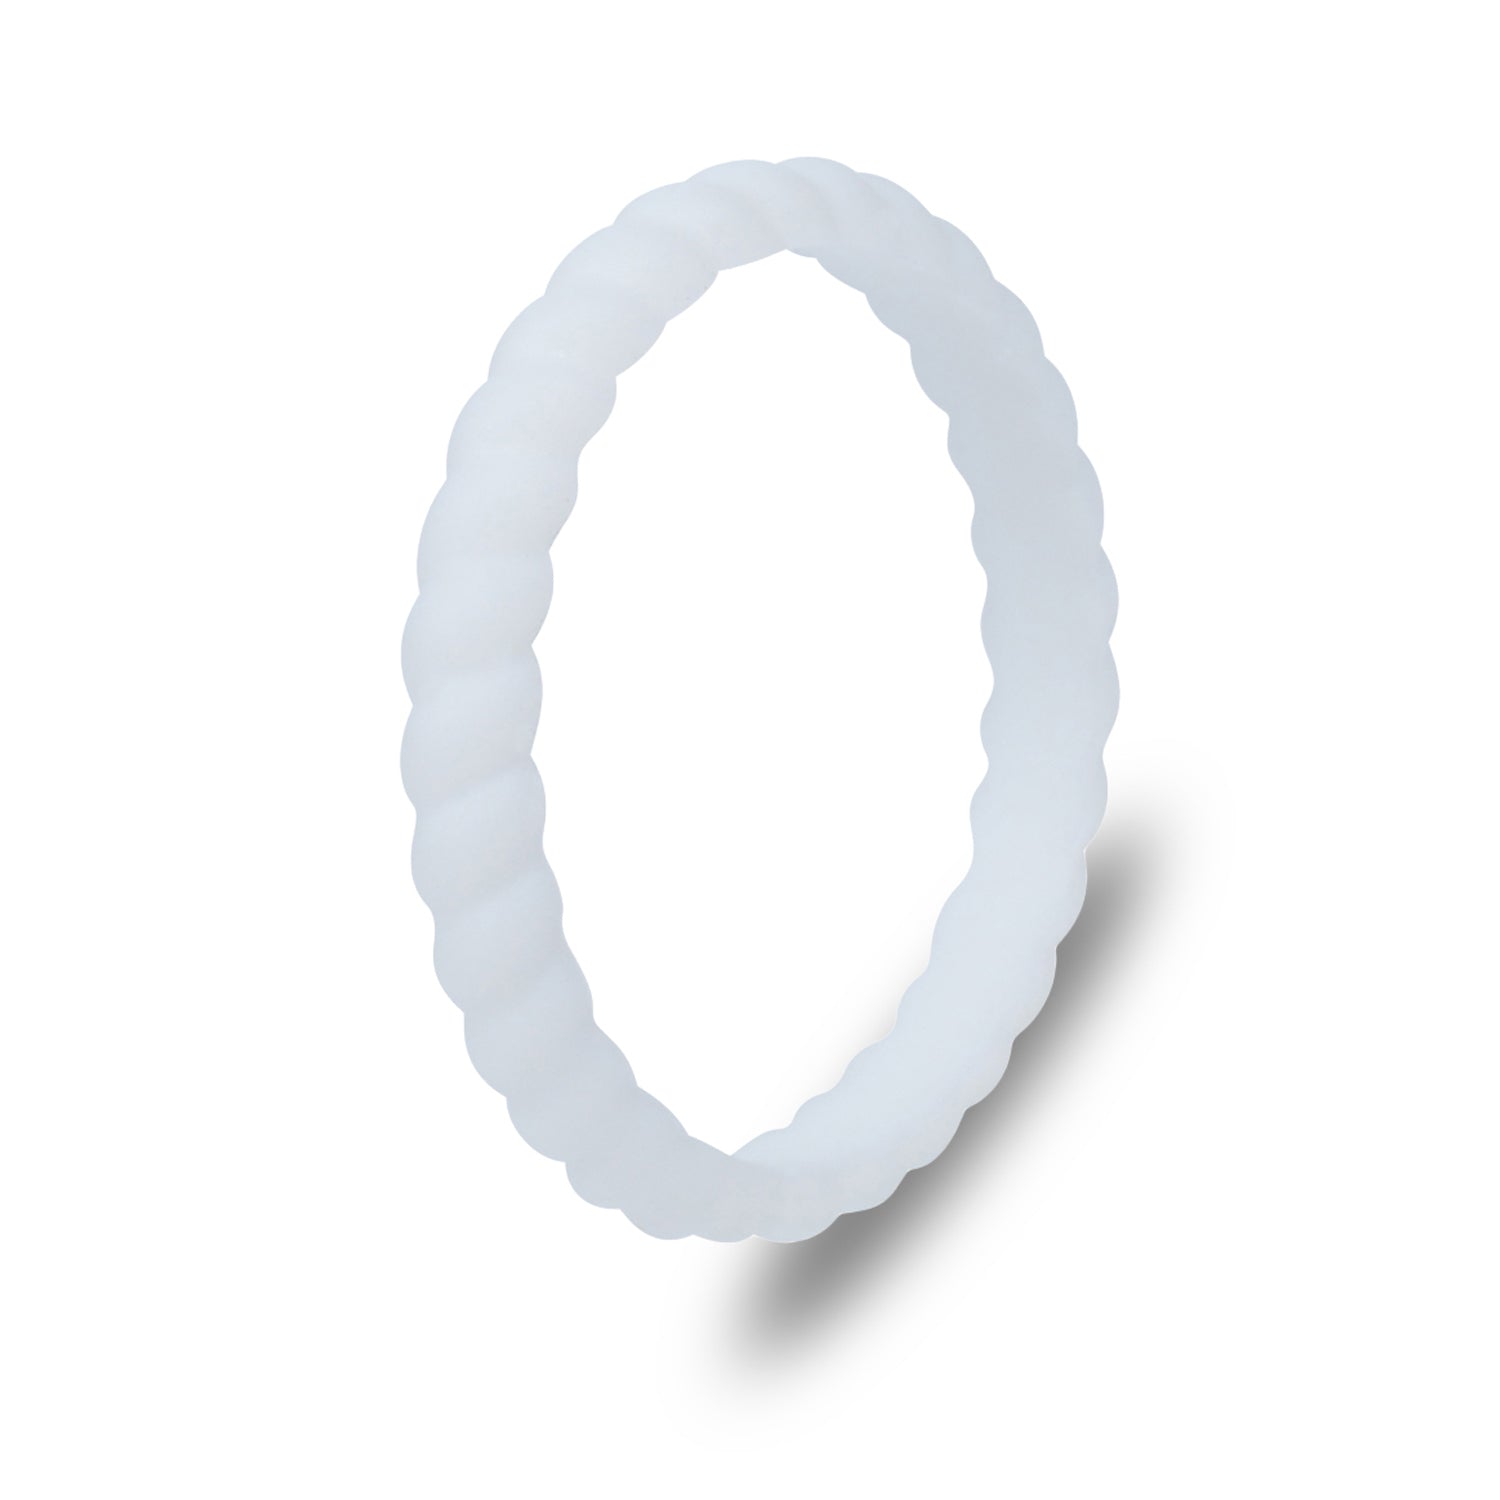 The Sally - Silicone Ring